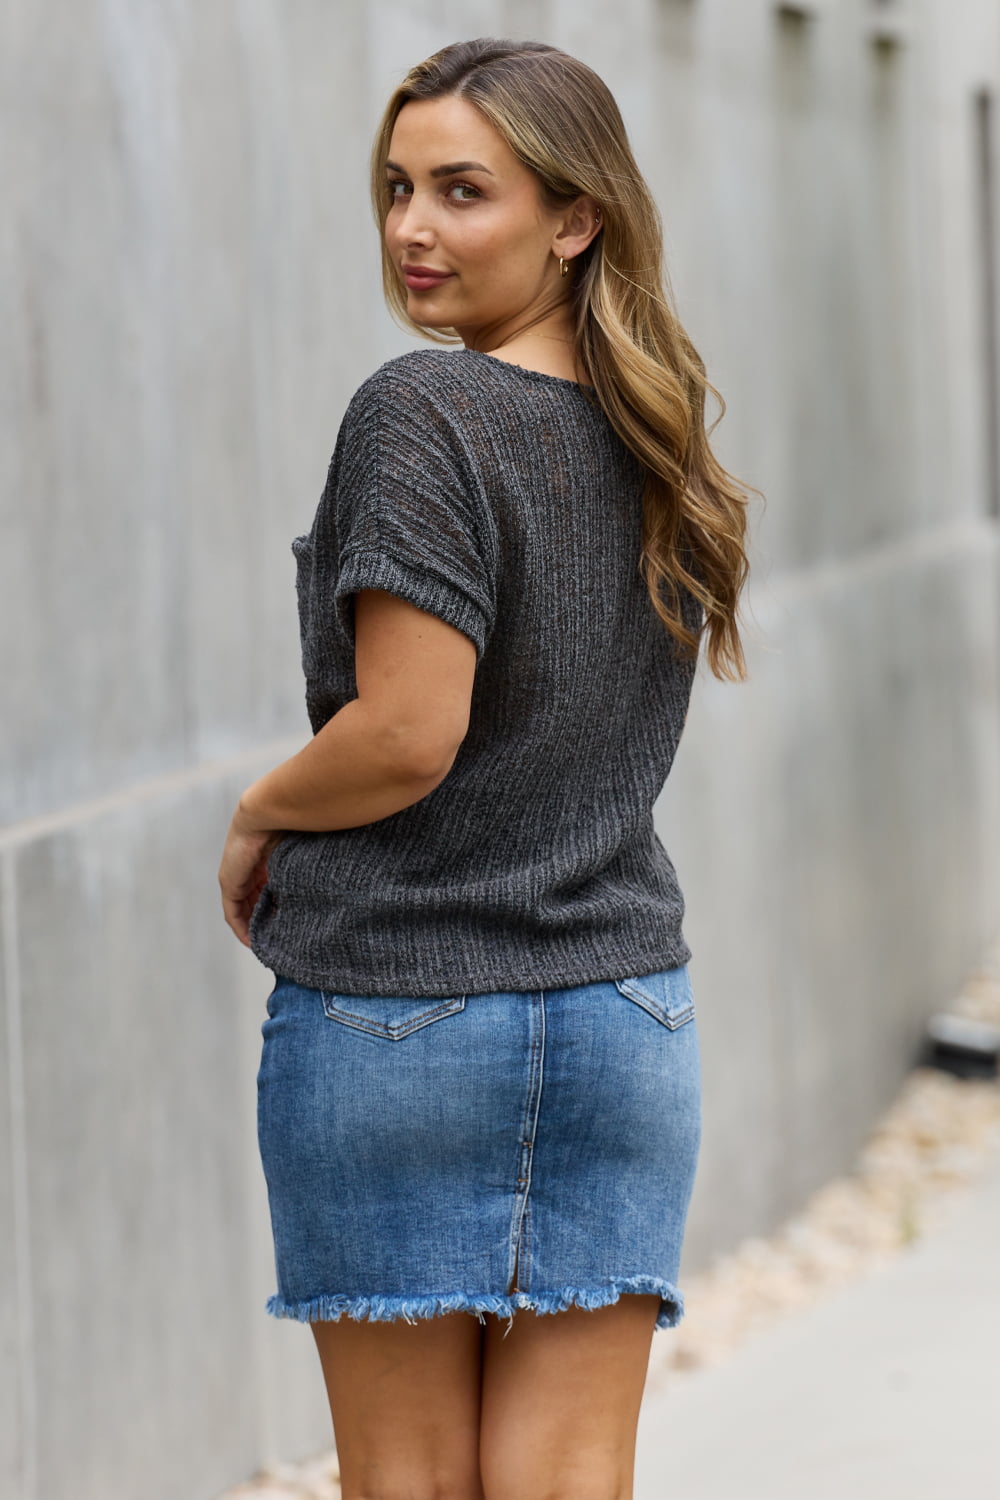 Chunky Knit Short Sleeve Top in Gray - Camis & Tops - Shirts & Tops - 2 - 2024